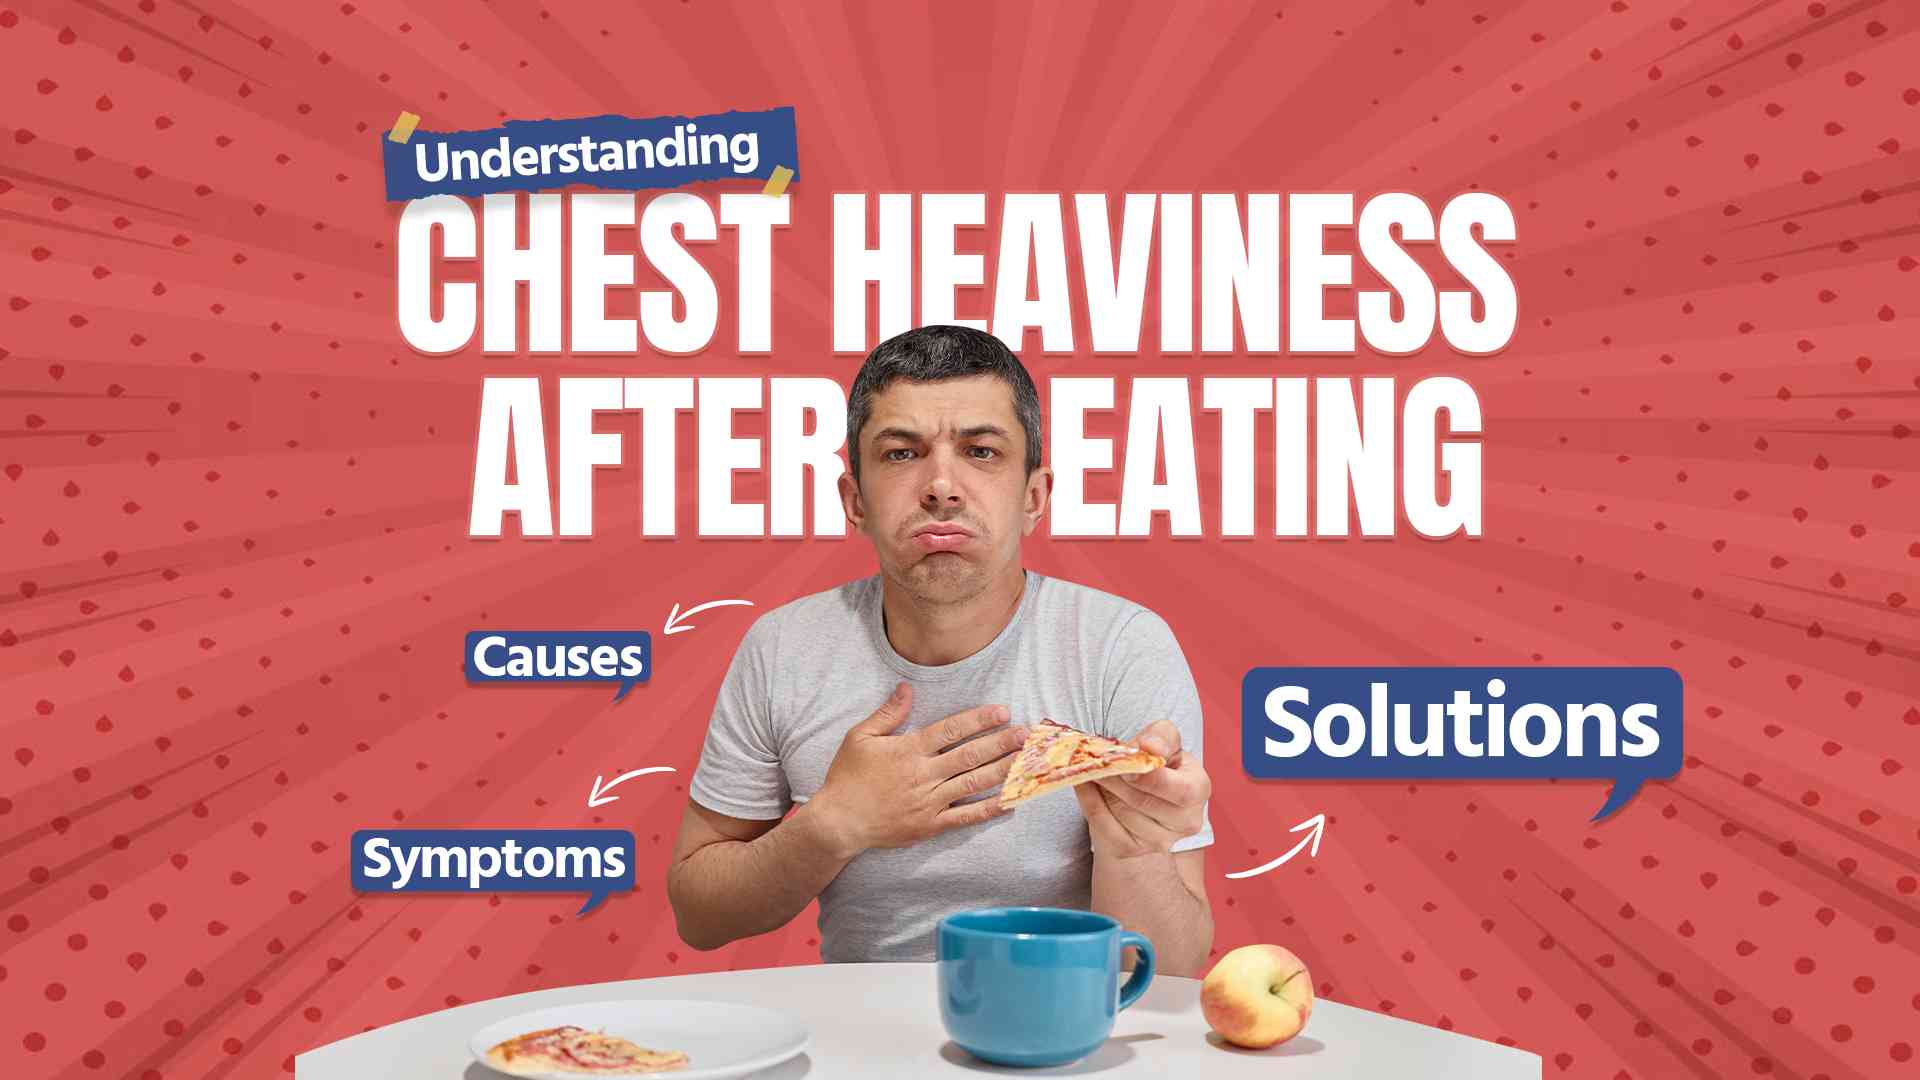 Understanding Chest Heaviness after Eating: Causes, Symptoms, and Solutions